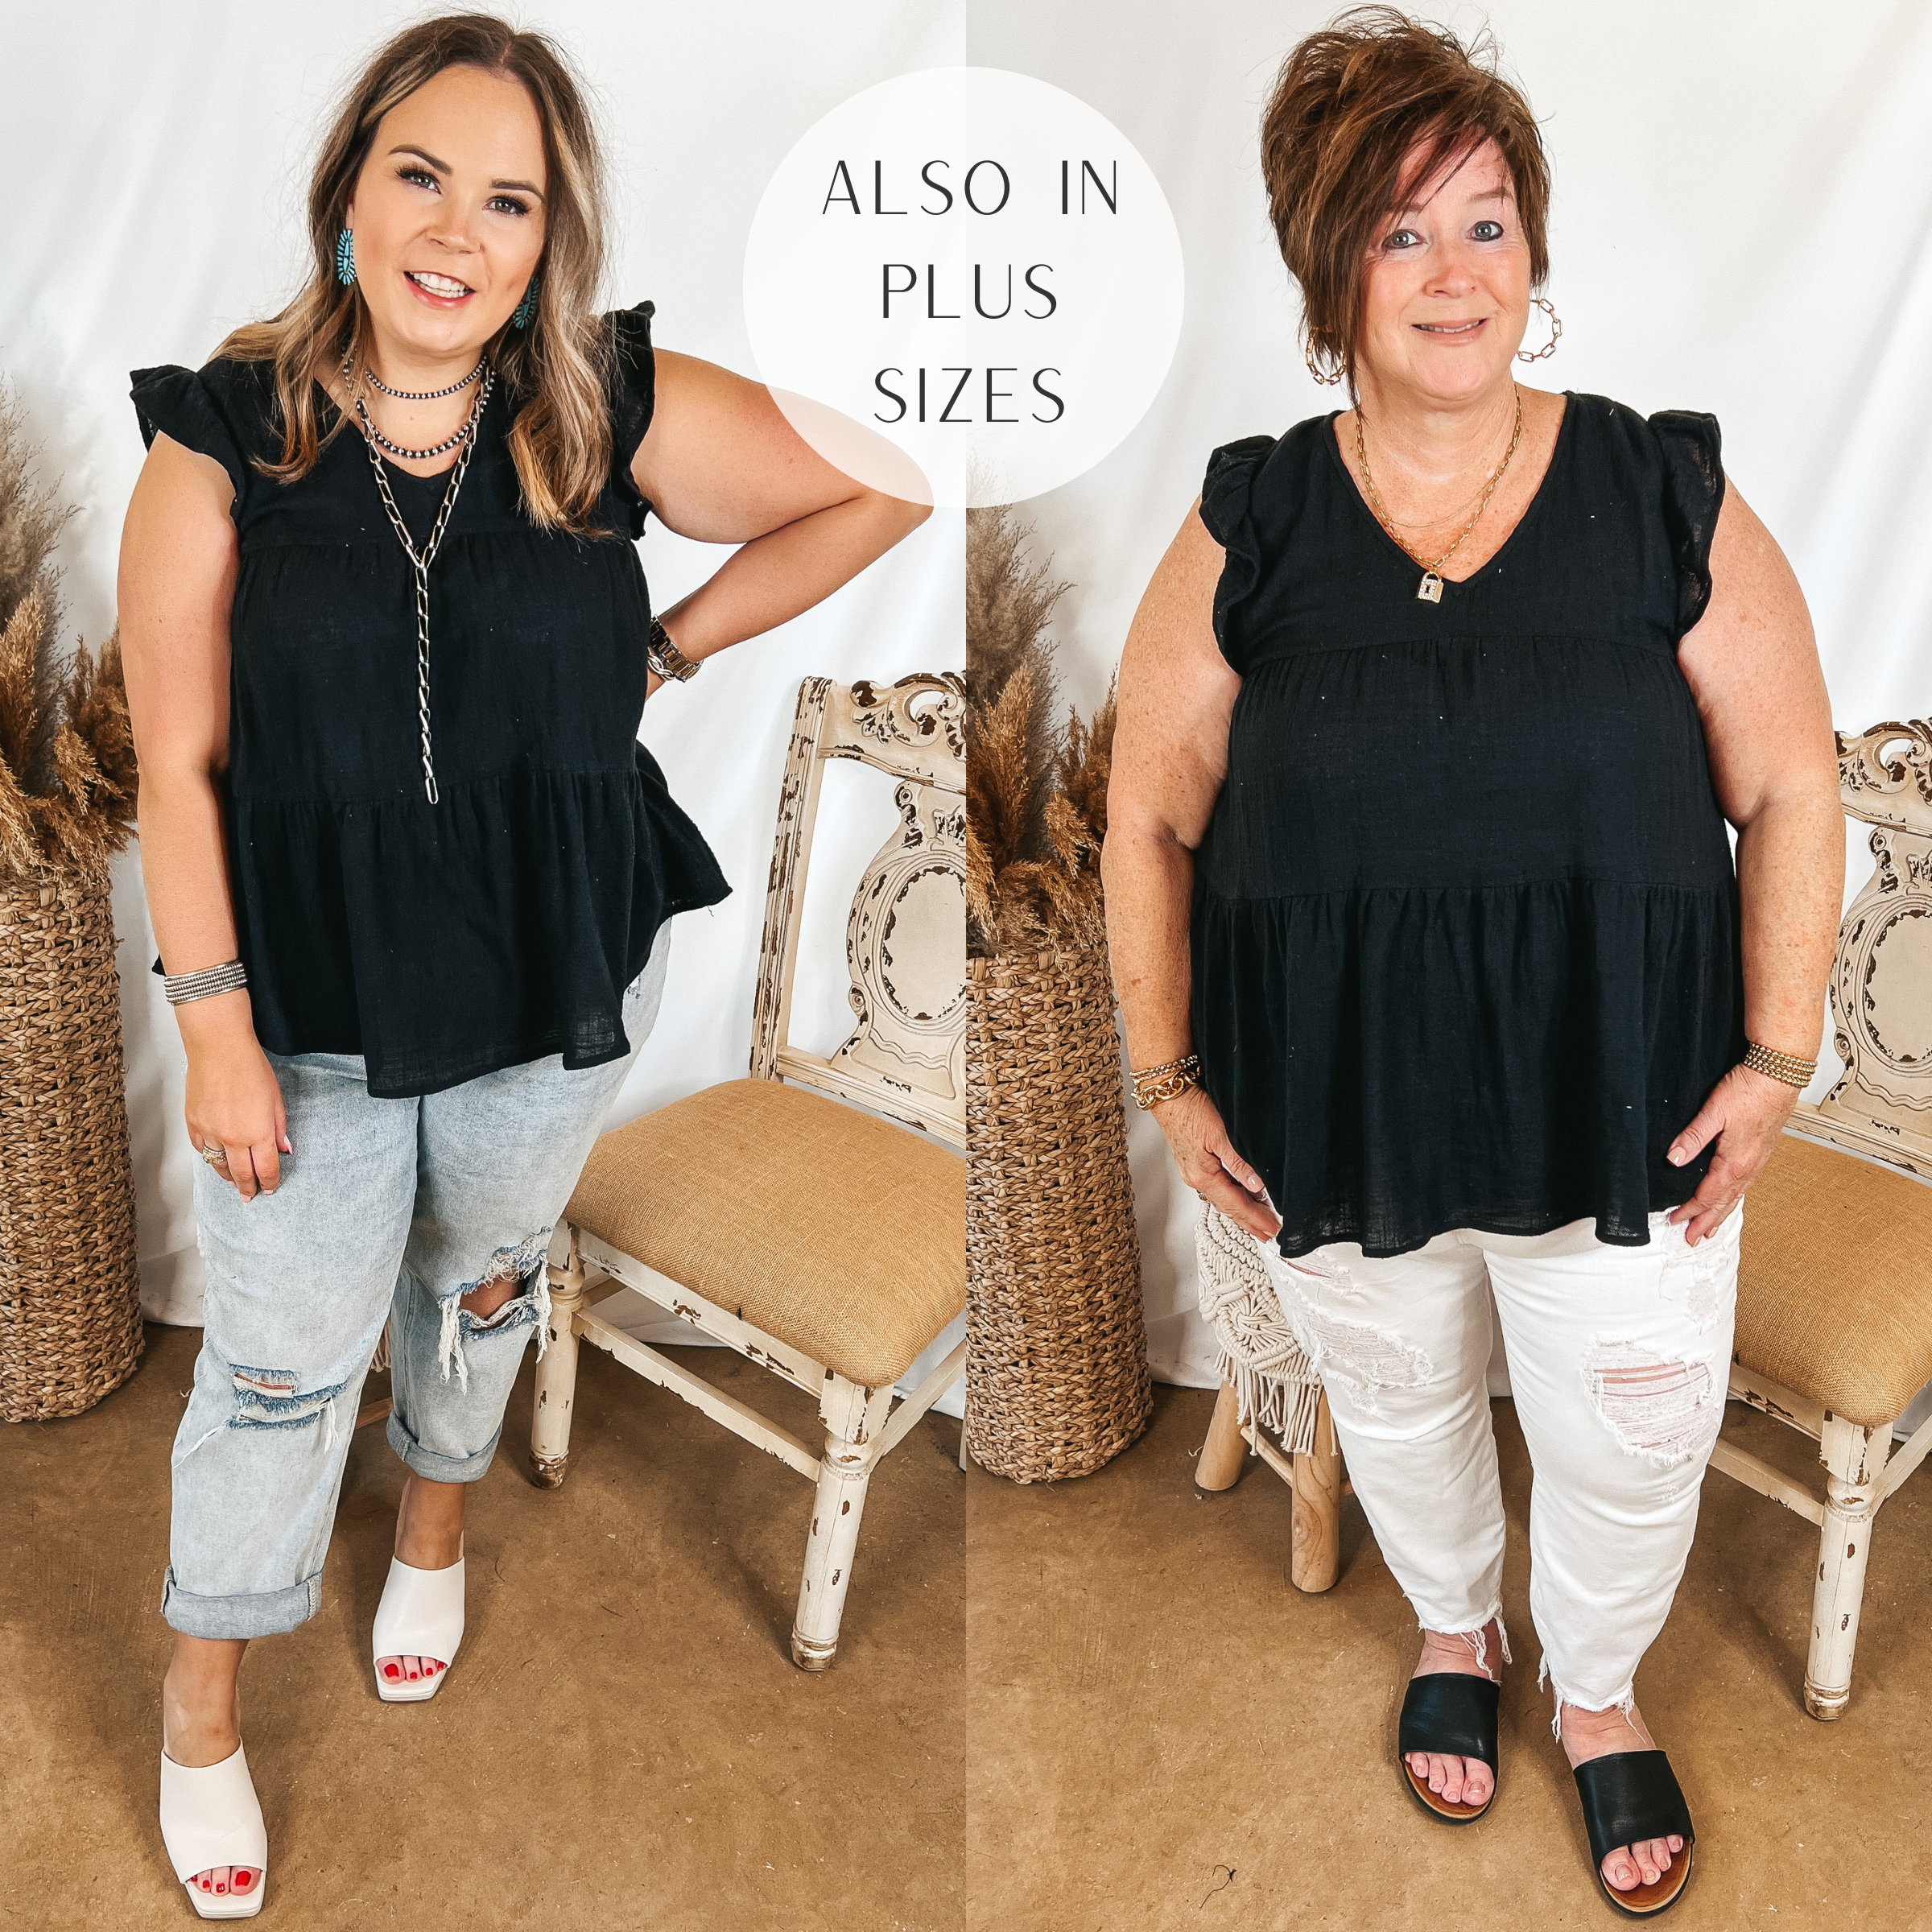 Models are wearing a black tiered top with ruffle cap sleeves. Size large model has it paired with light wash jeans, white heels, and silver jewelry. Plus size model has it paired with white distressed jeans, black sandals, and gold jewelry.